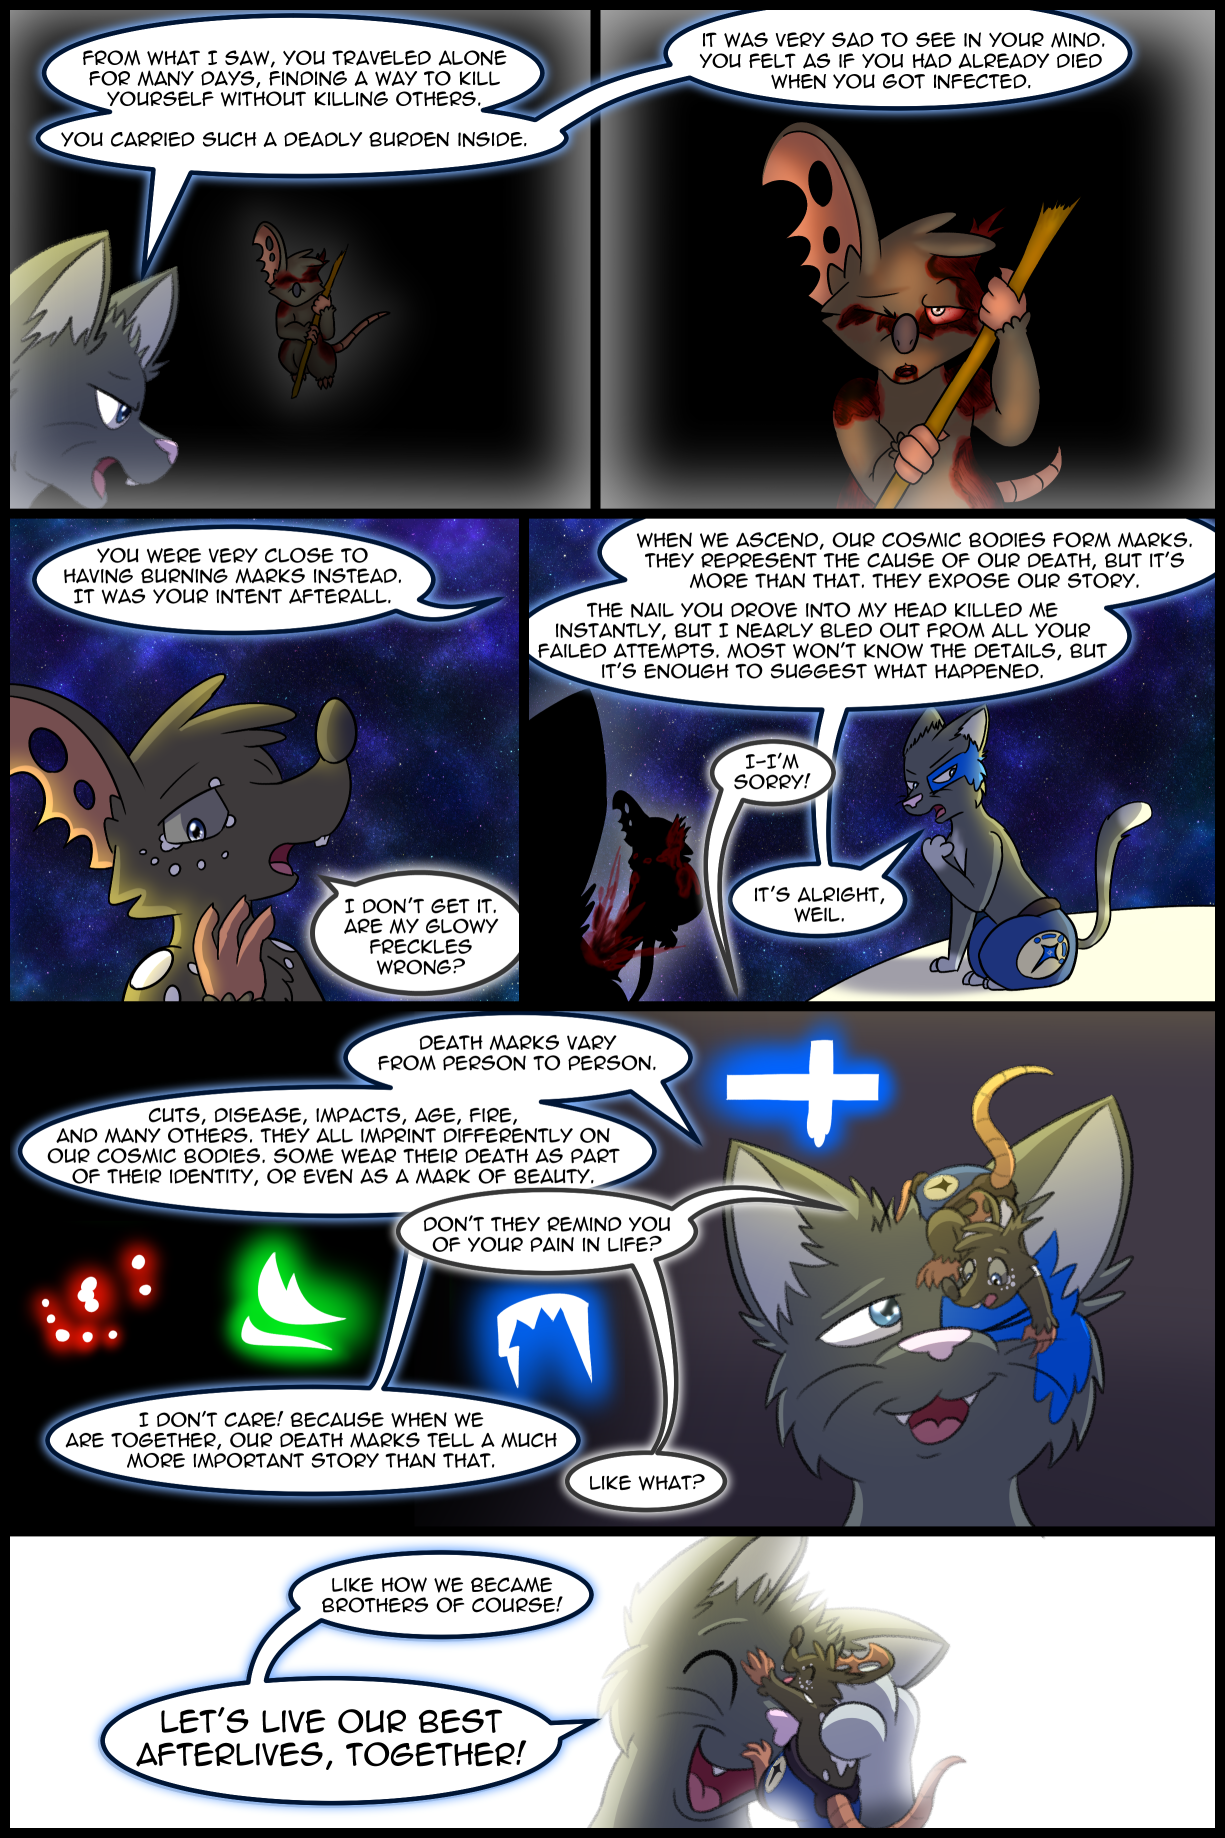 Ch4 Page 32 – Death Marks